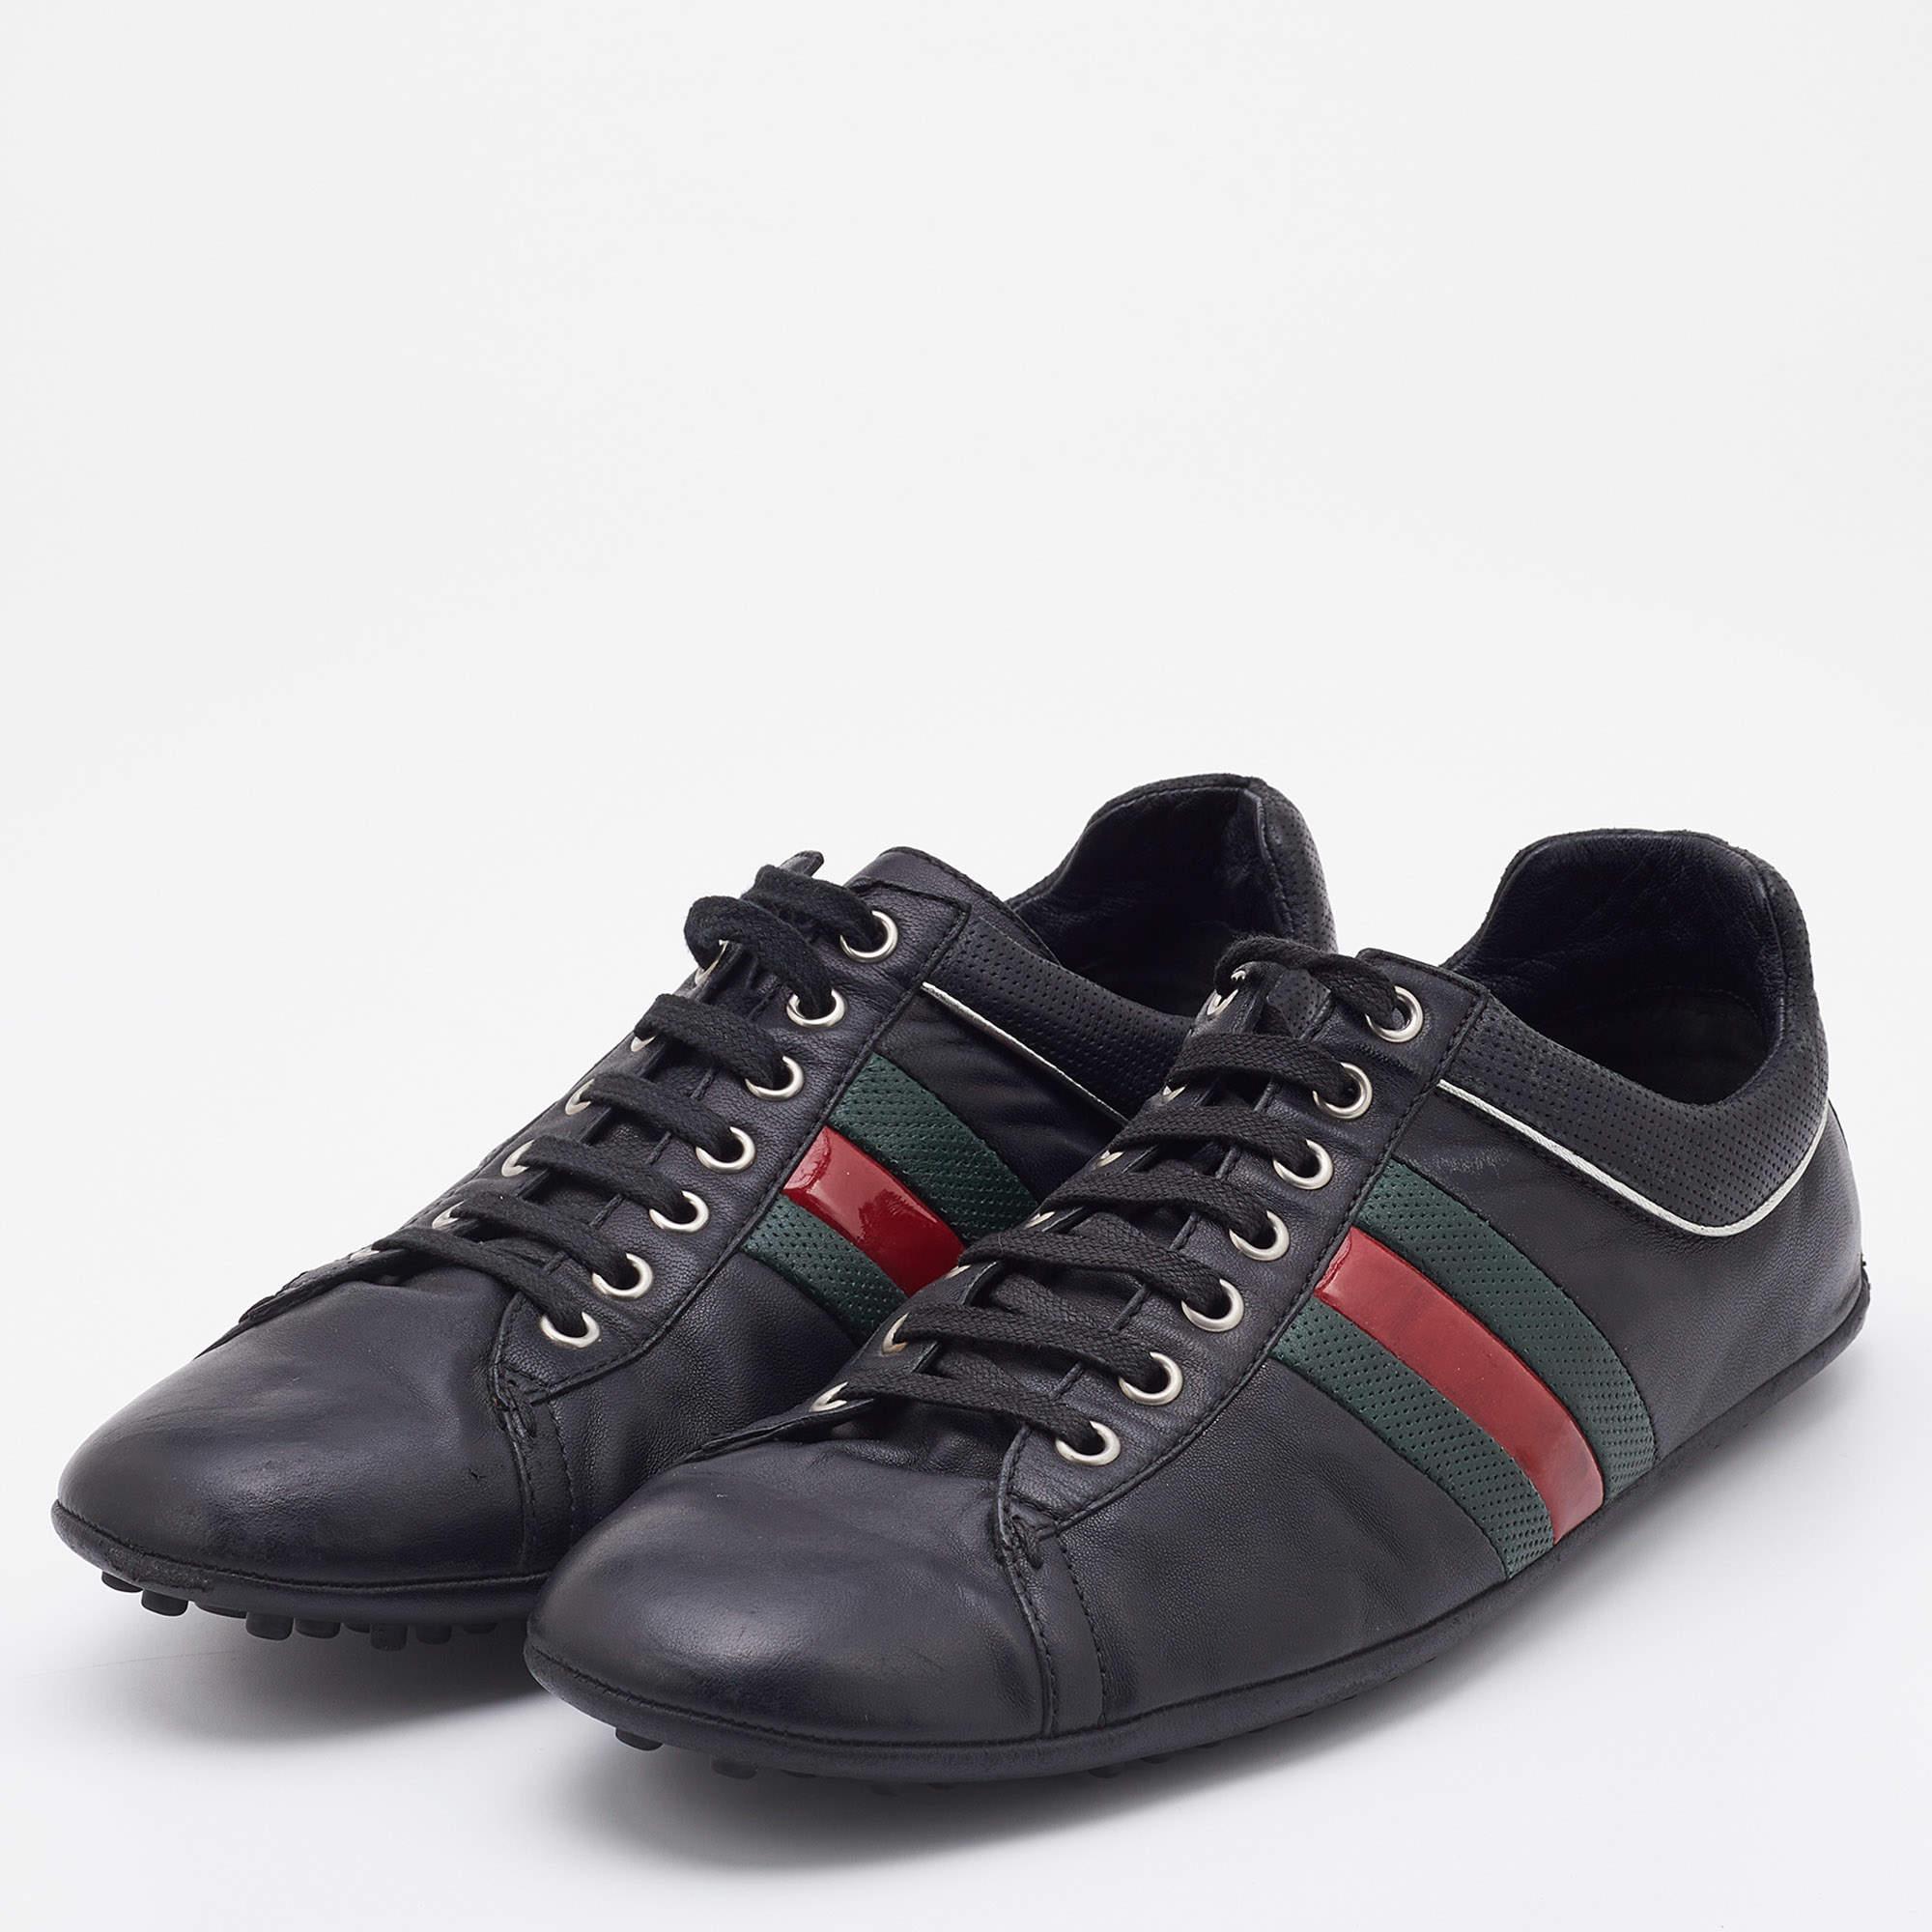 Gucci Black Leather Web Detail Low Top Sneakers Size 42.5 1